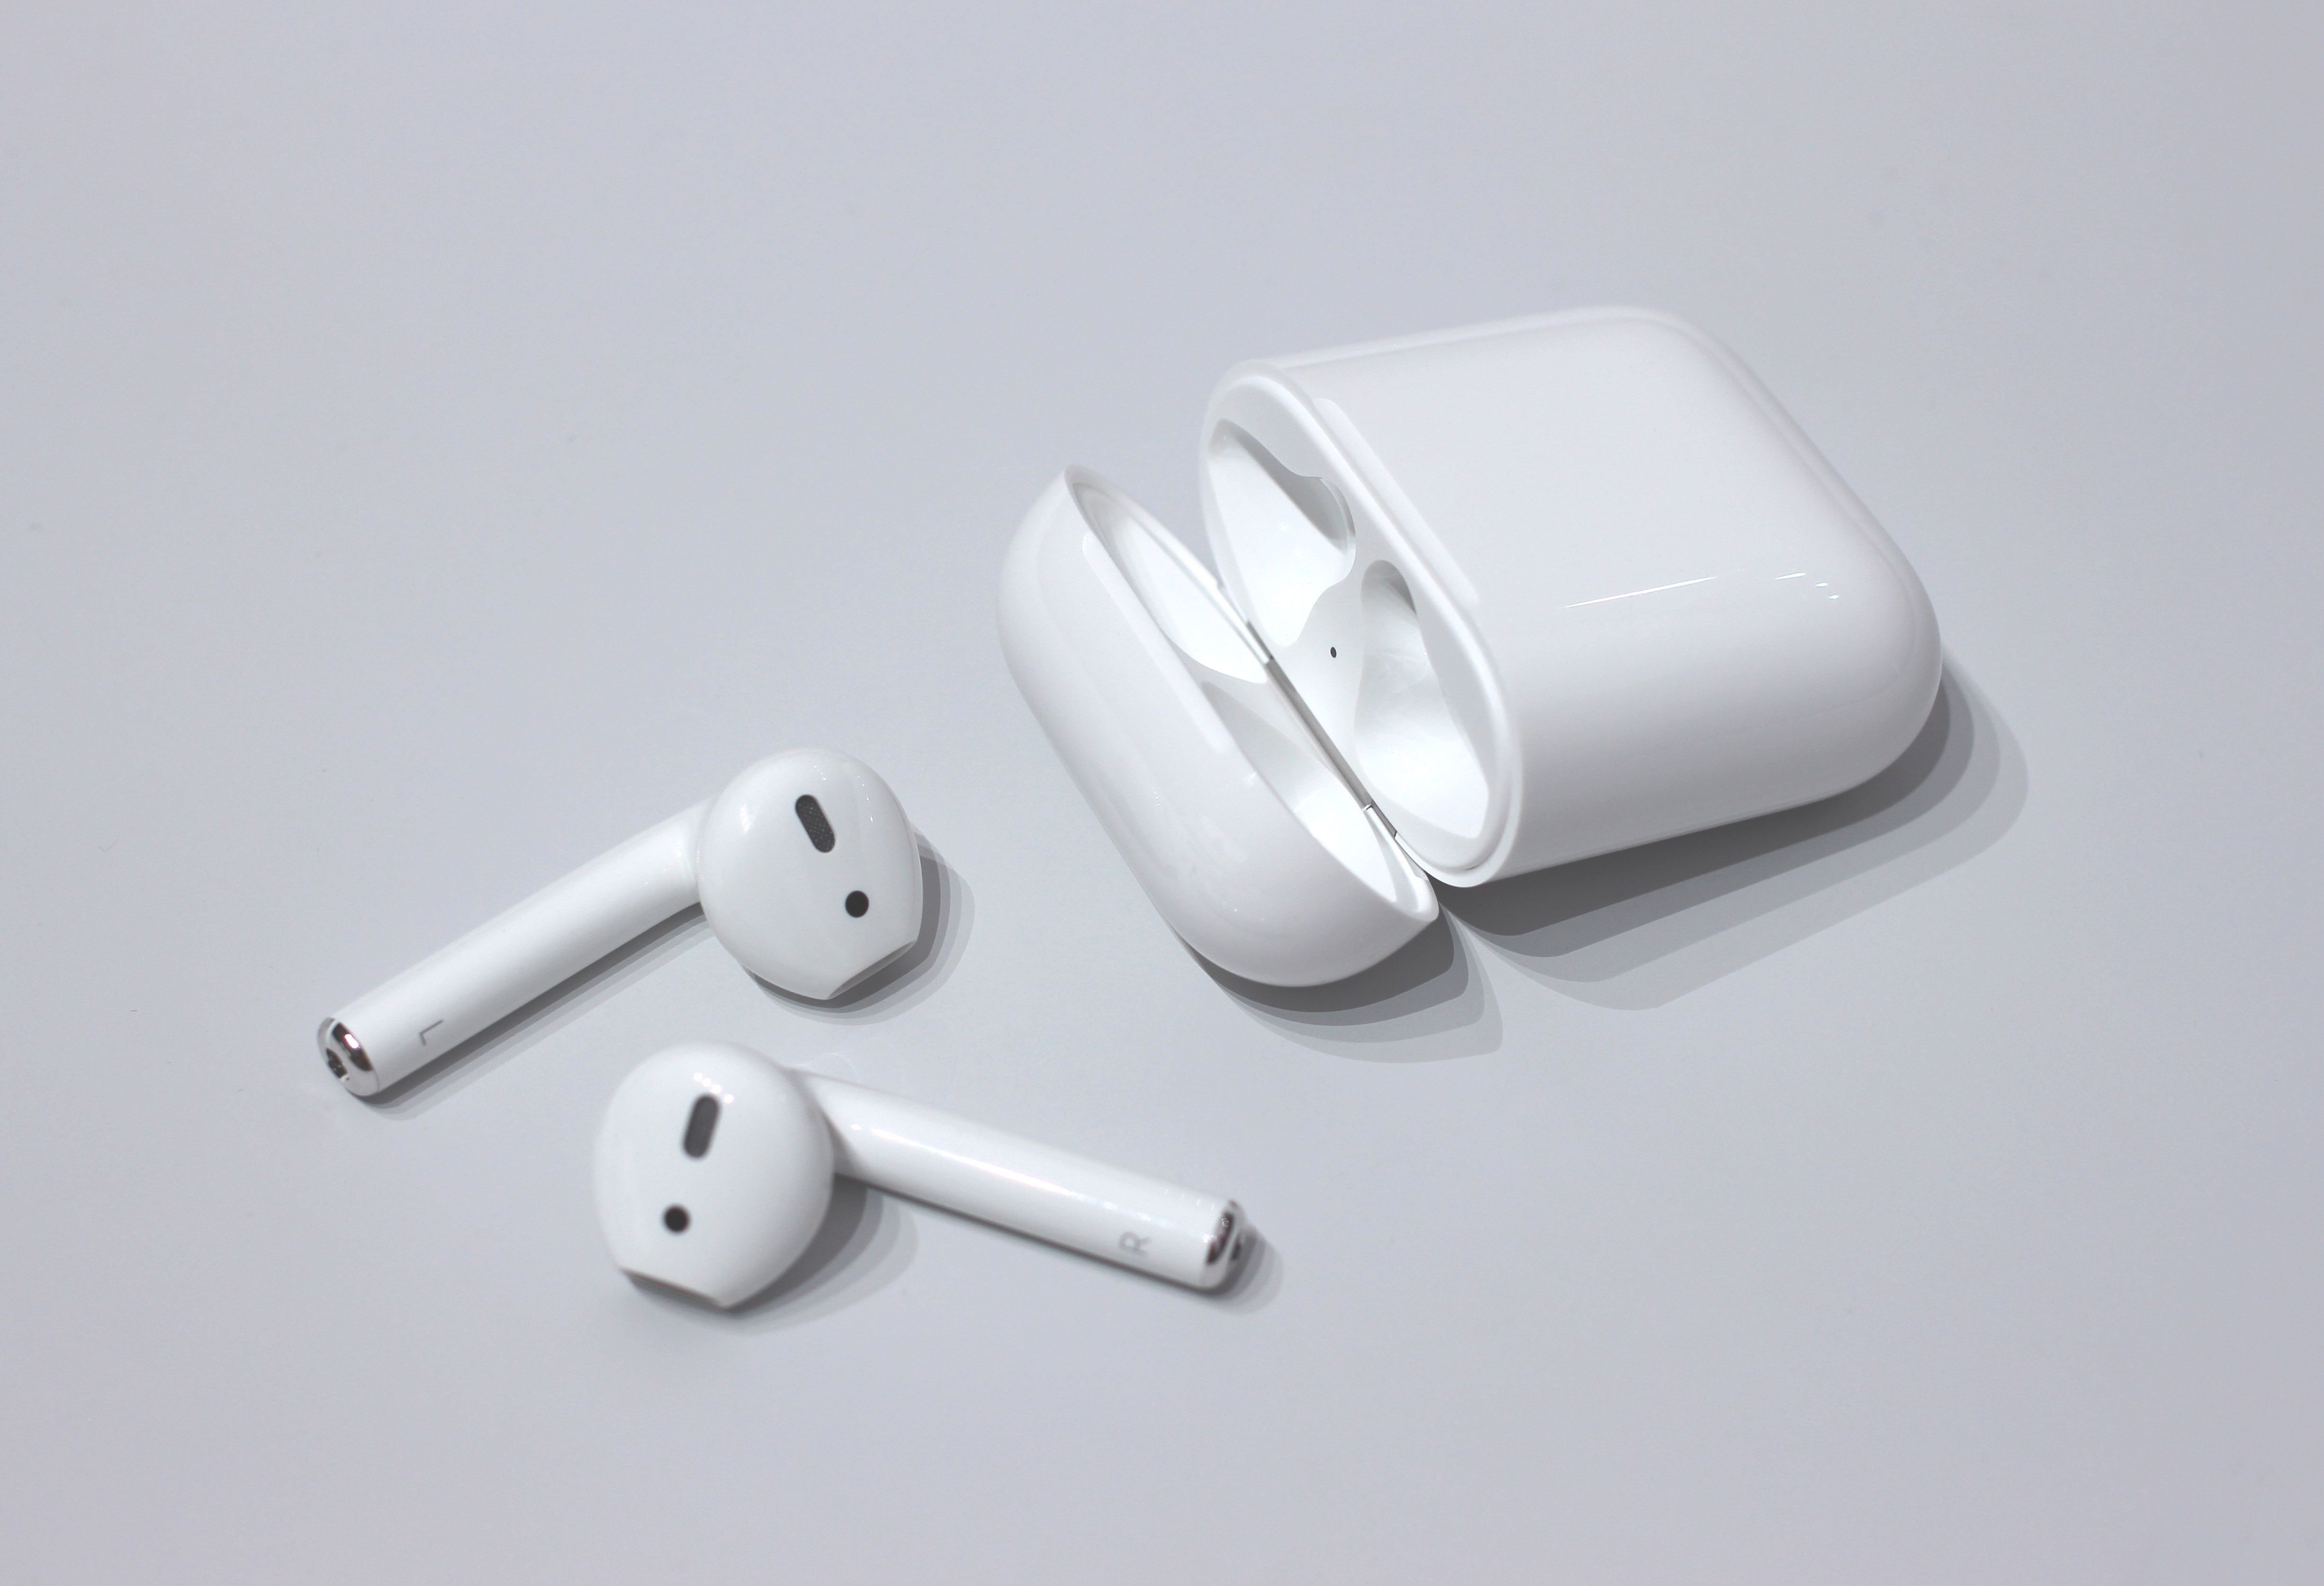 Airpods Apple / Wikimedia Commons